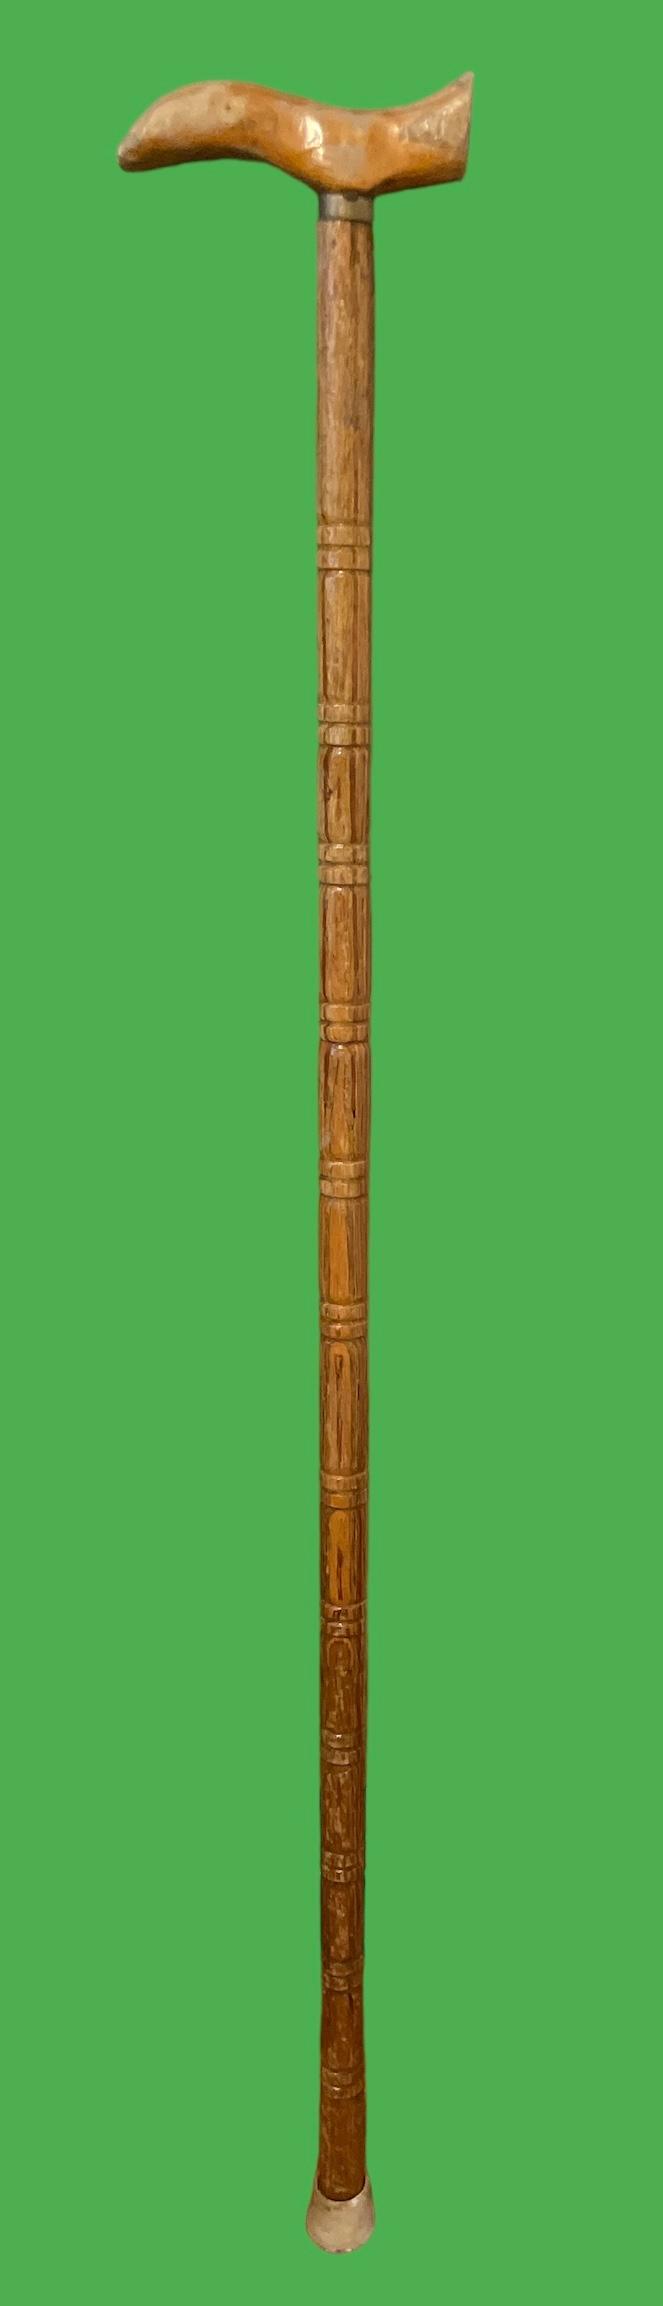 Vintage Wooden Cane—35.5” Tall